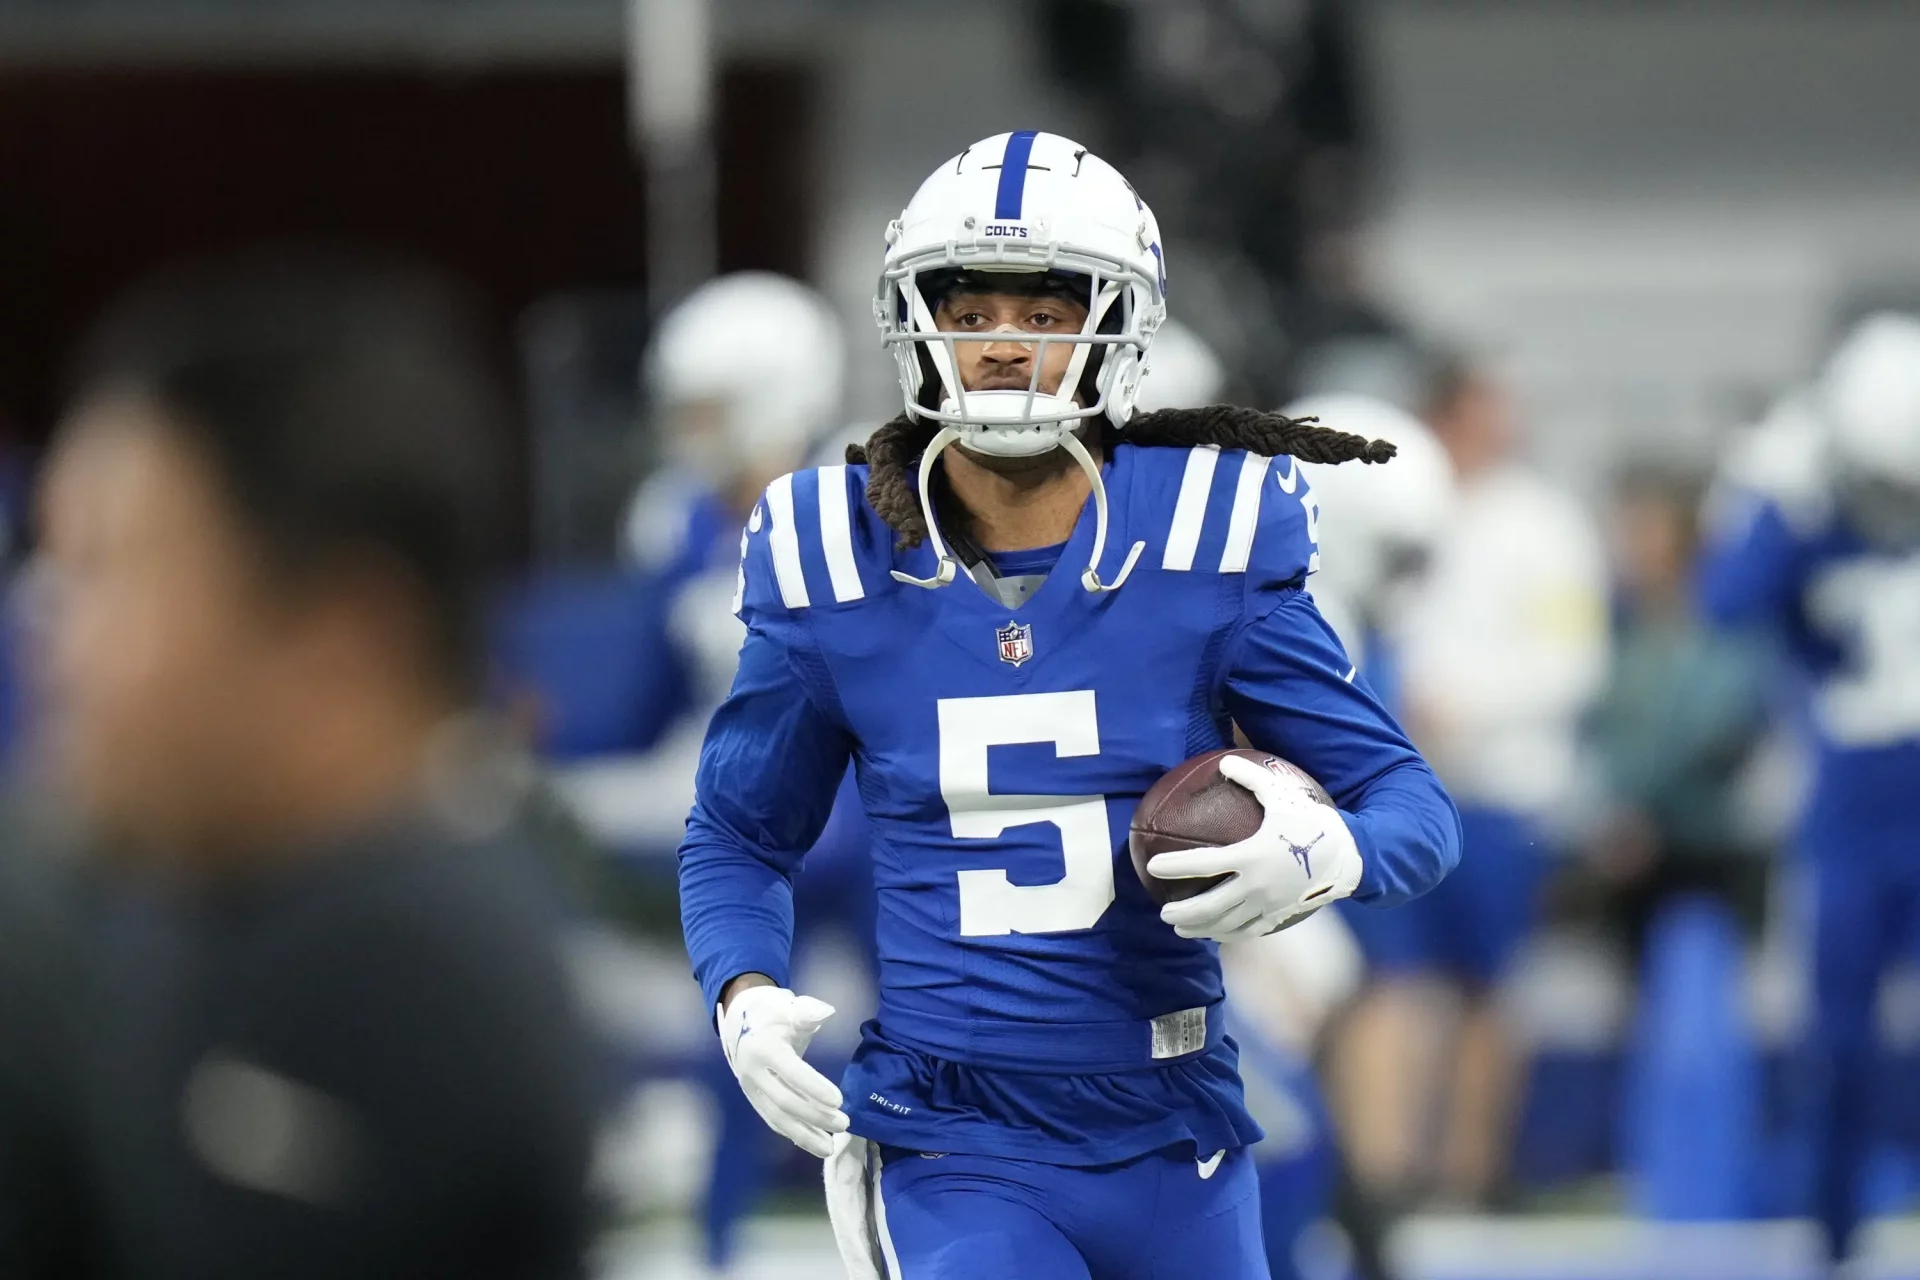 Stephon Gilmore playing for the Colts